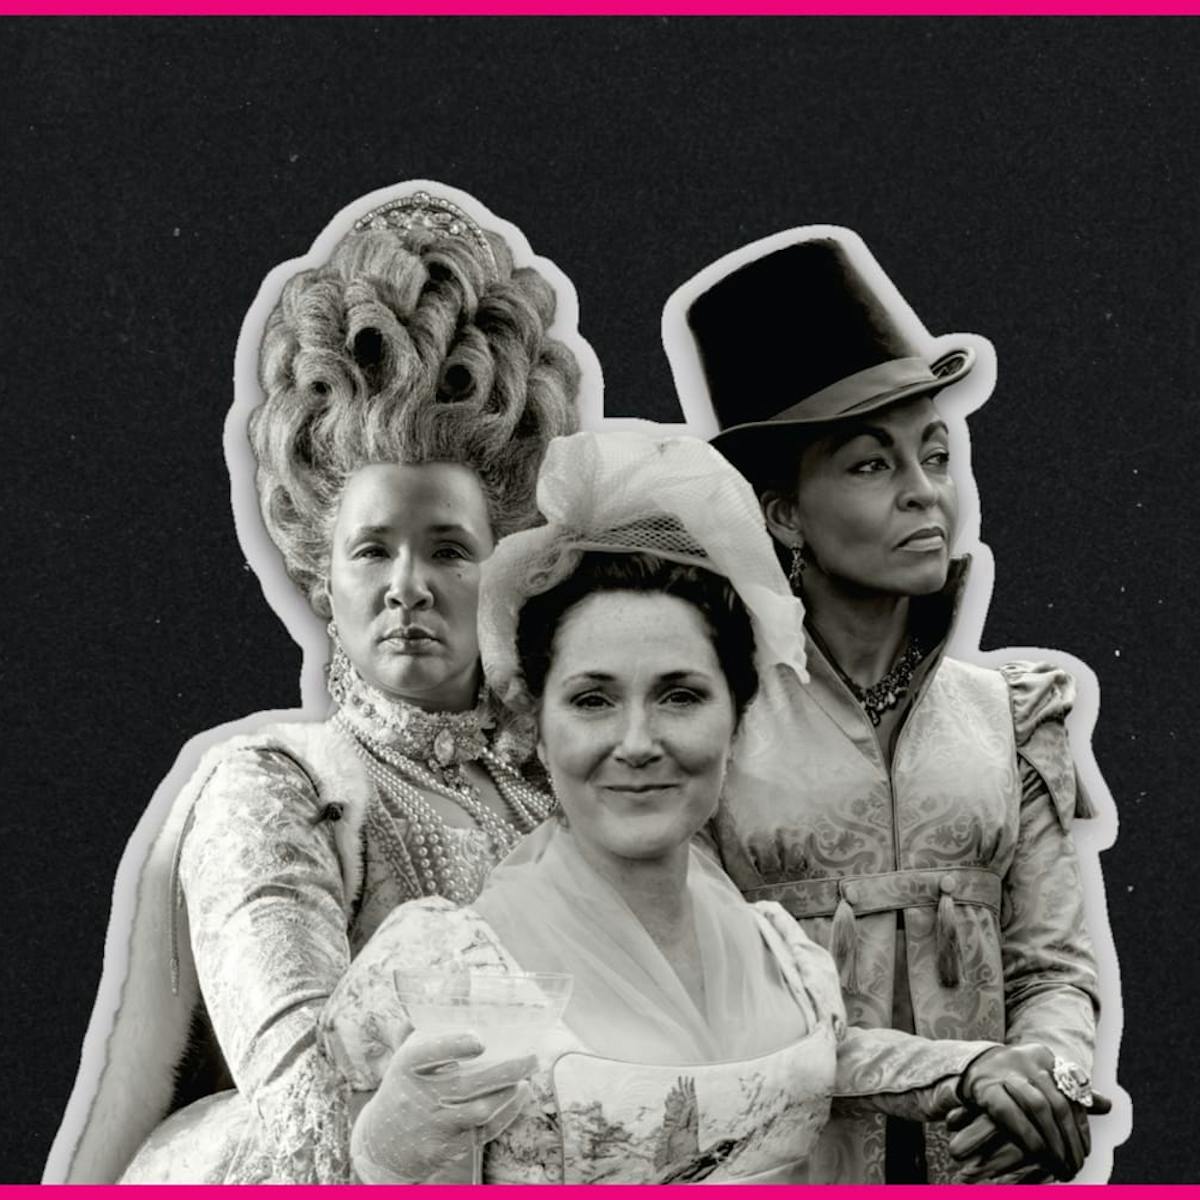 The three matriarchs of Bridgerton in a black-and-white shot. From left to right: Queen Charlotte with her wig piled high, Lady Violet Bridgerton wears a gauzy hat and scarf, and Lady Danbury wears a top hat.